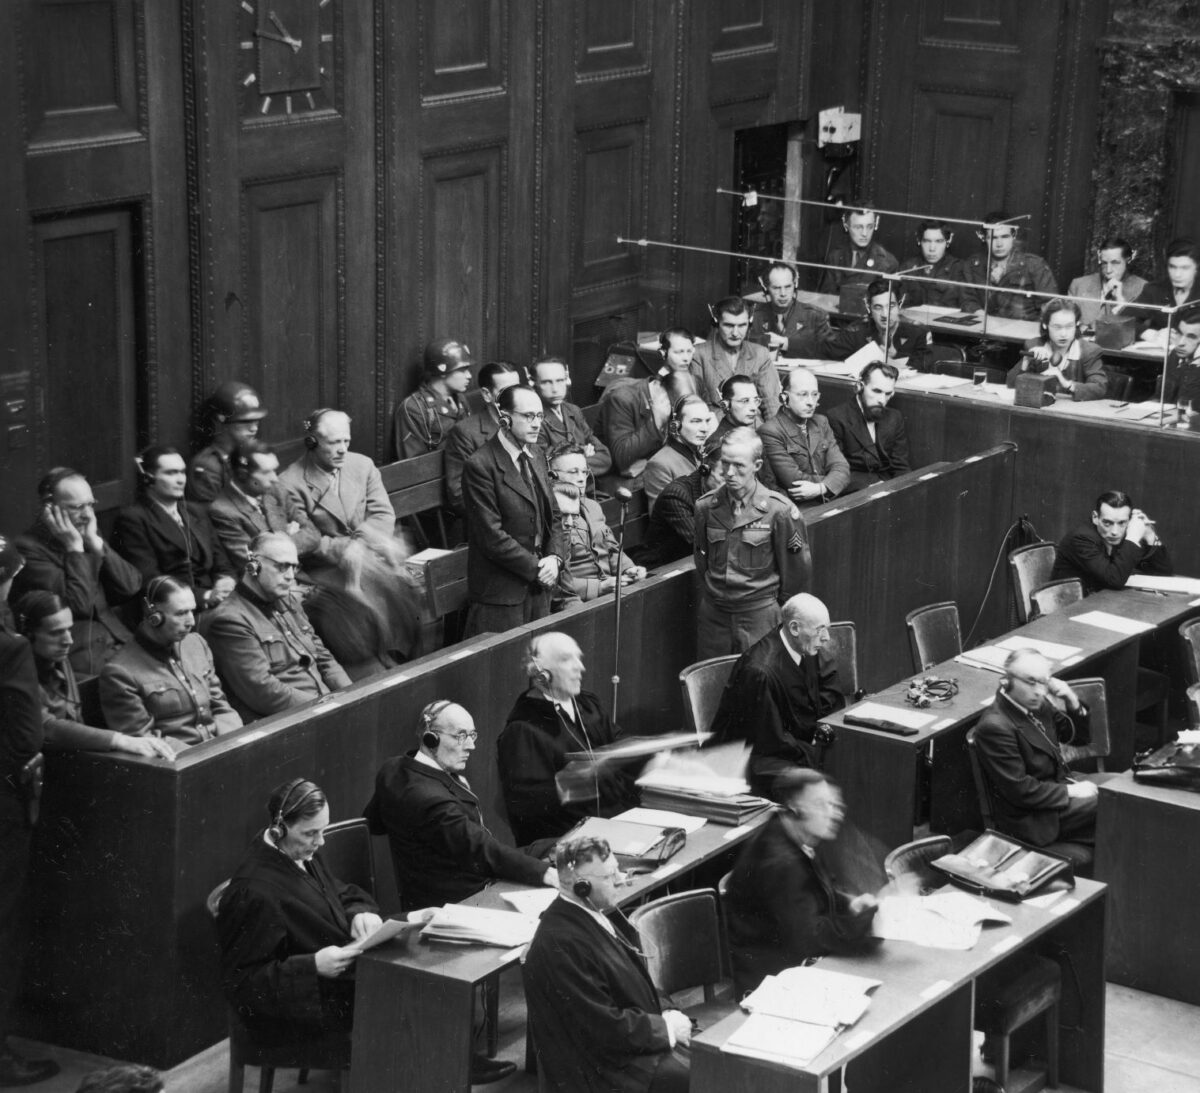 The Nuremburg Trials, circa 1945. The Nazi industrialists were given a slap on the wrist at the trials, according to author David De Jong. (Fotosearch/Getty Images)